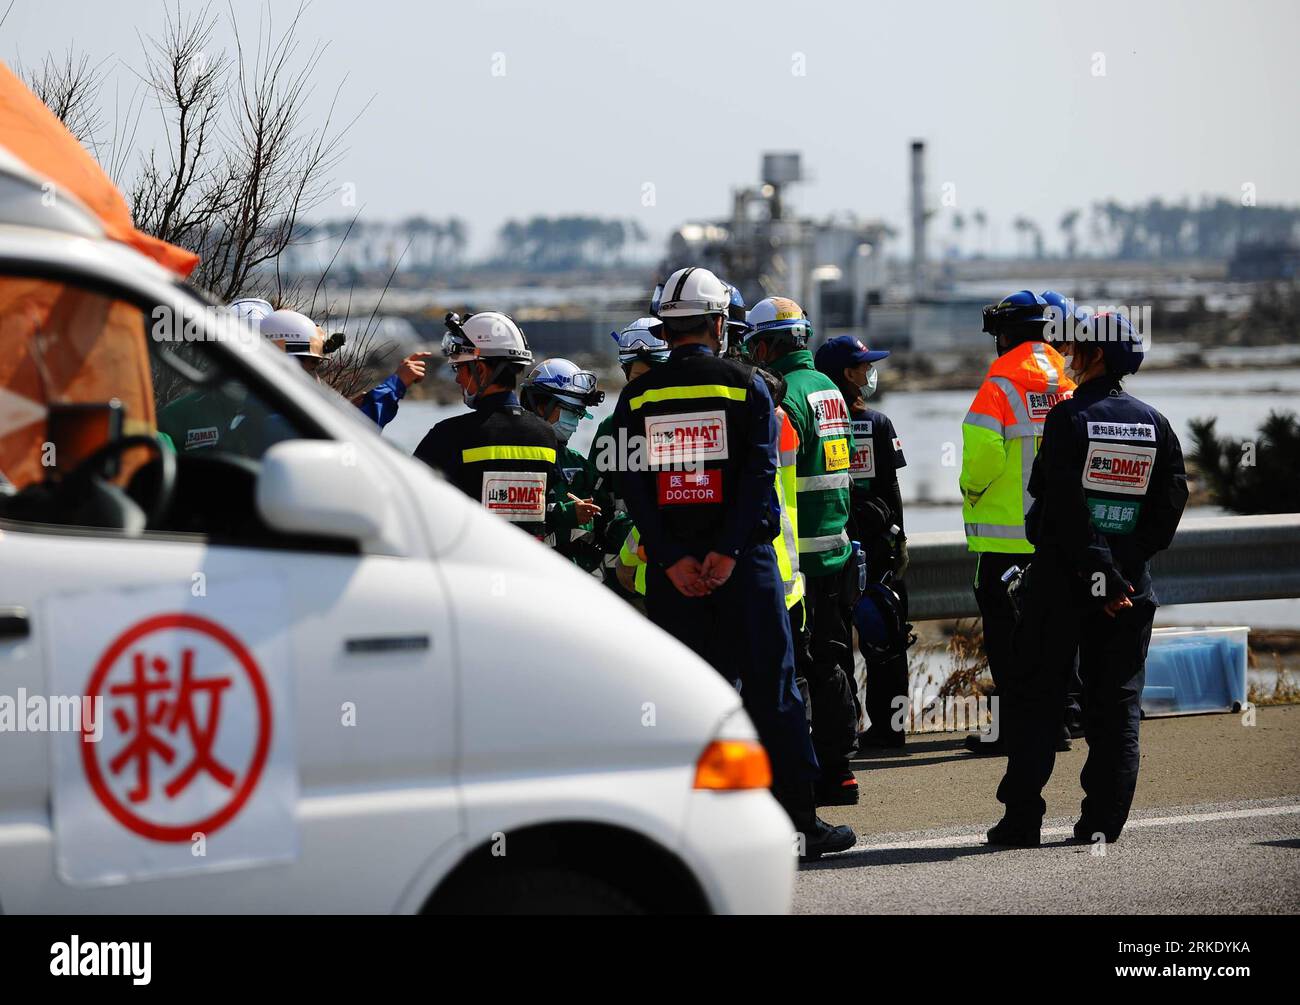 Bildnummer: 55019324  Datum: 13.03.2011  Copyright: imago/Xinhua SENDAI, March 13, 2011 (Xinhua) -- Rescuers are seen at Sanbontsuka of Wakabayashi District in Sendai City, Miyagi Prefecture, Japan, March 13, 2011. The area lost contact with the outside world after Friday s quake and tsunami. Friday s catastrophic earthquake in Japan and the following devastating tsunami have ravaged the country, while massive rescue and recovery efforts have been quickly launched to save lives and minimize losses. (Xinhua/Ji Chunpeng)(yc) JAPAN-QUAKE PUBLICATIONxNOTxINxCHN Gesellschaft Naturkatastrophe Erdbeb Stock Photo